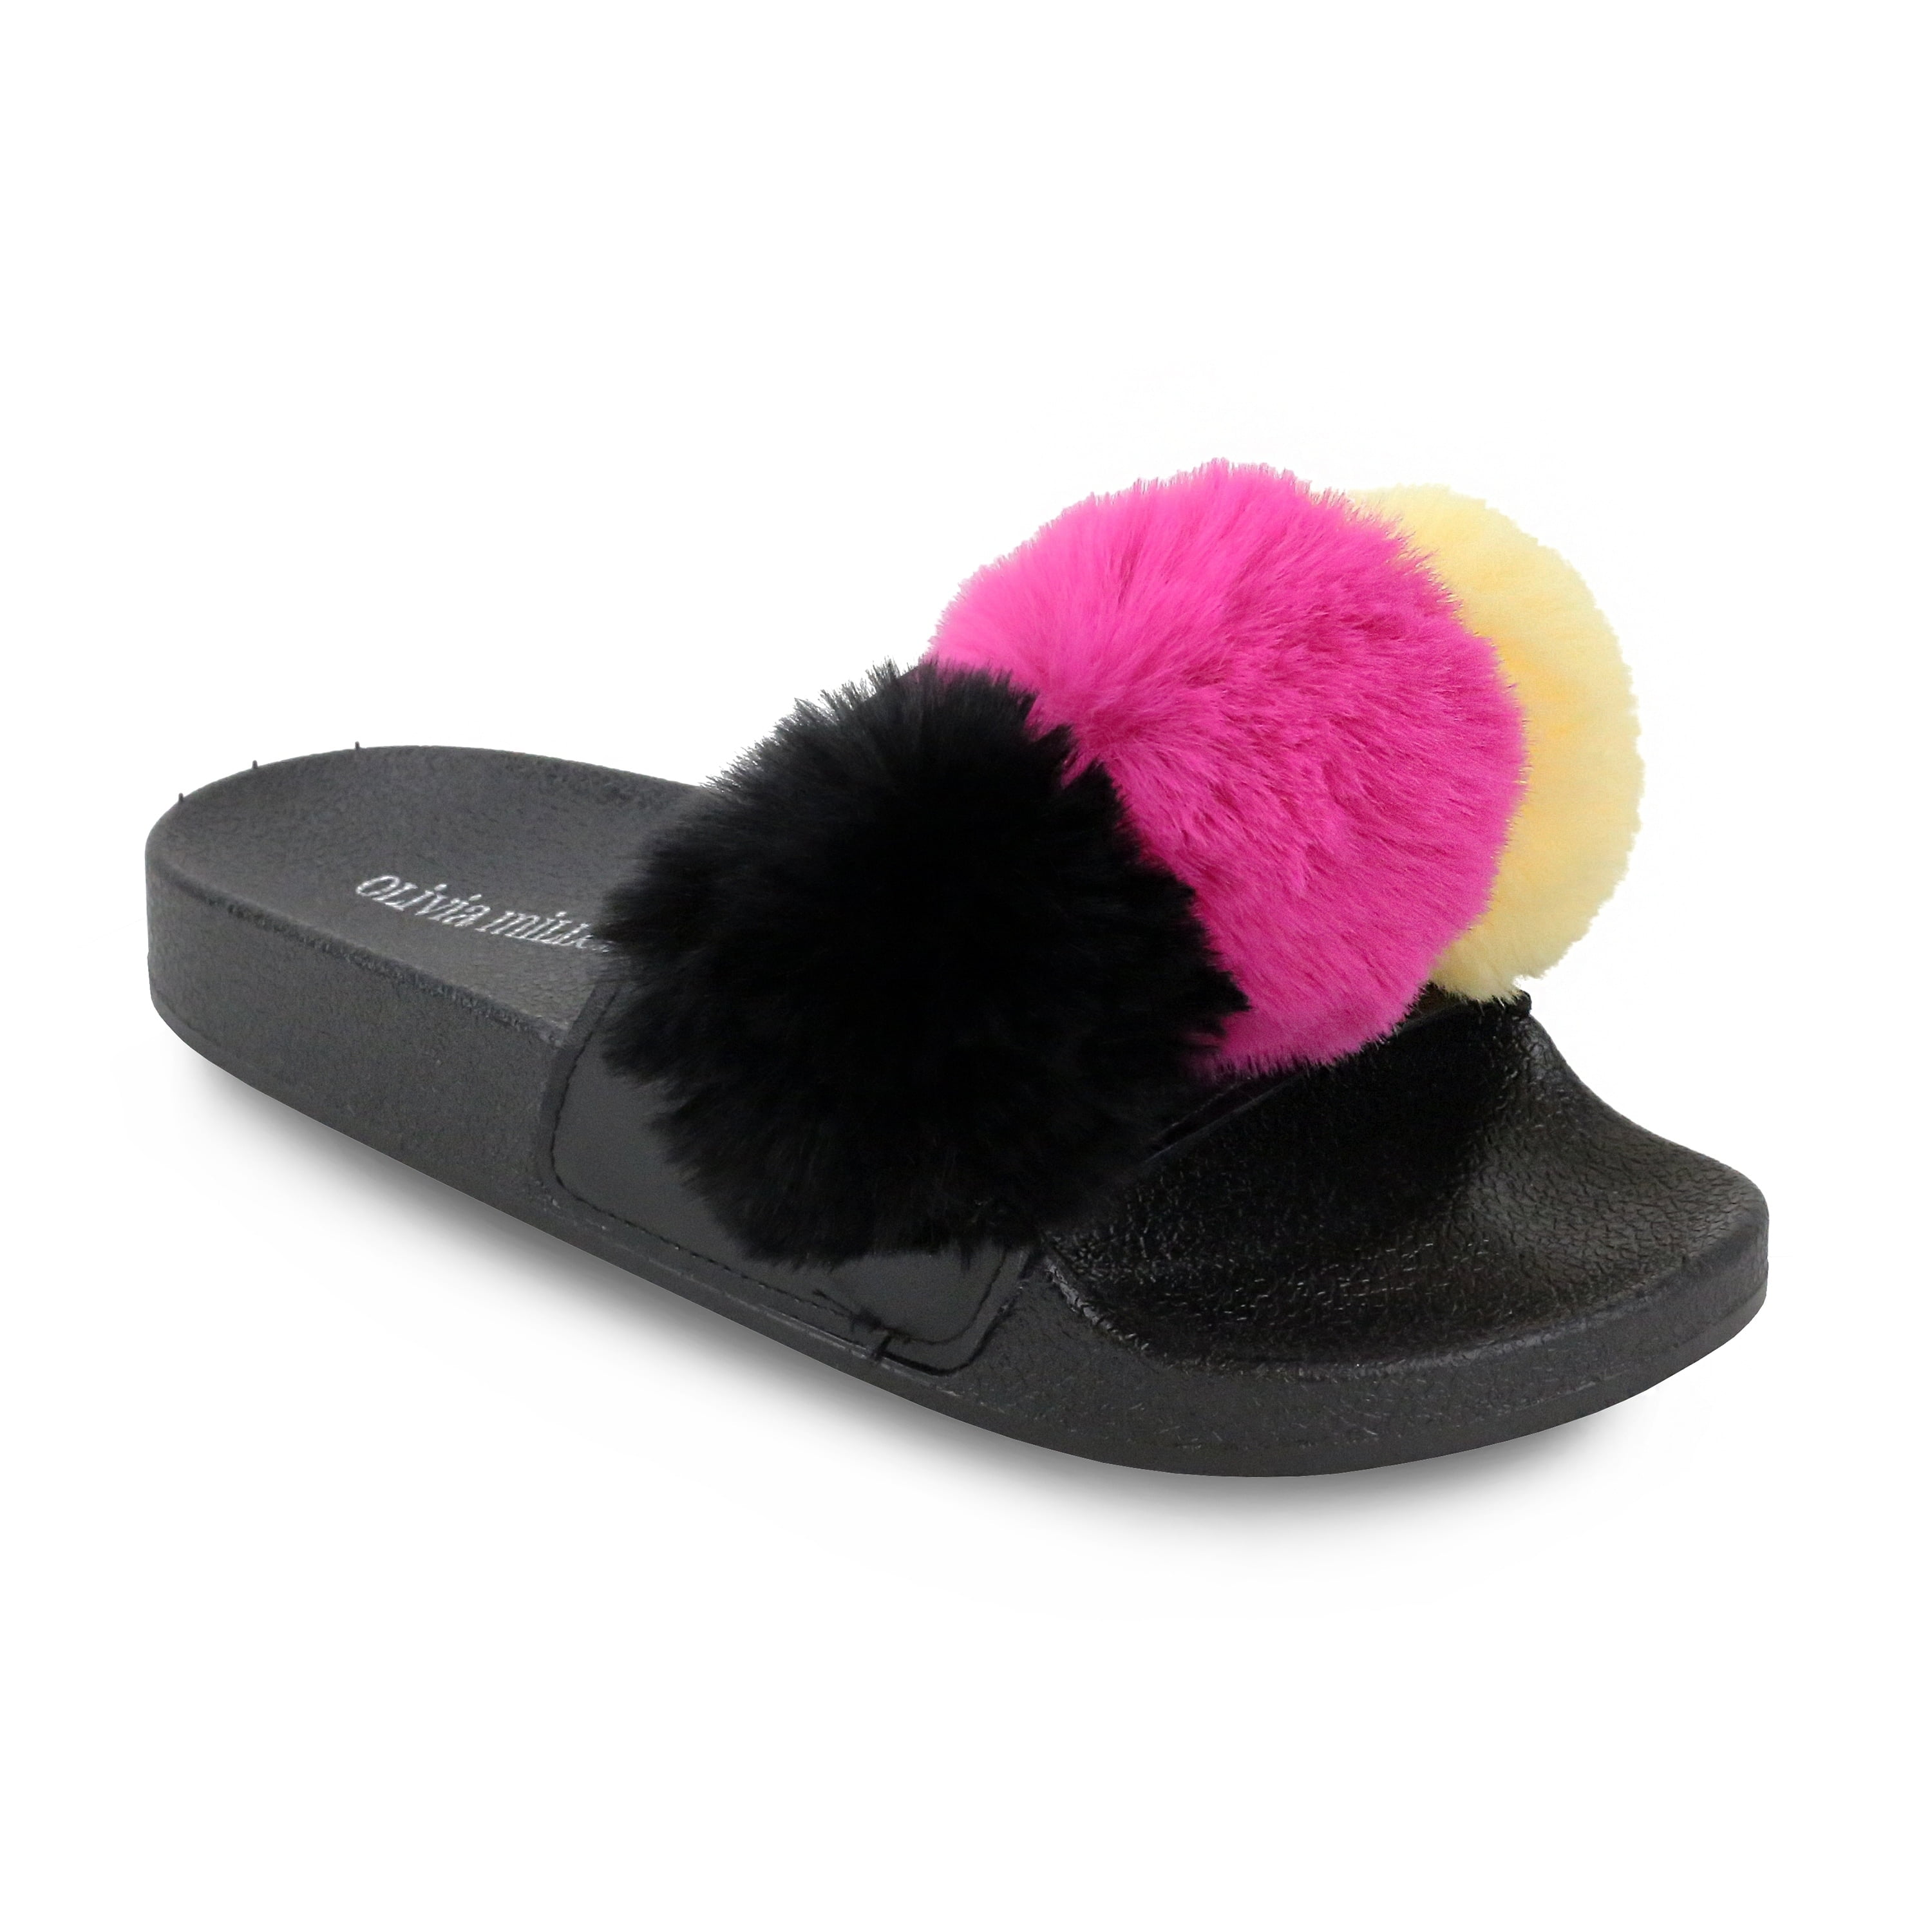 sandals with fluffy pom poms